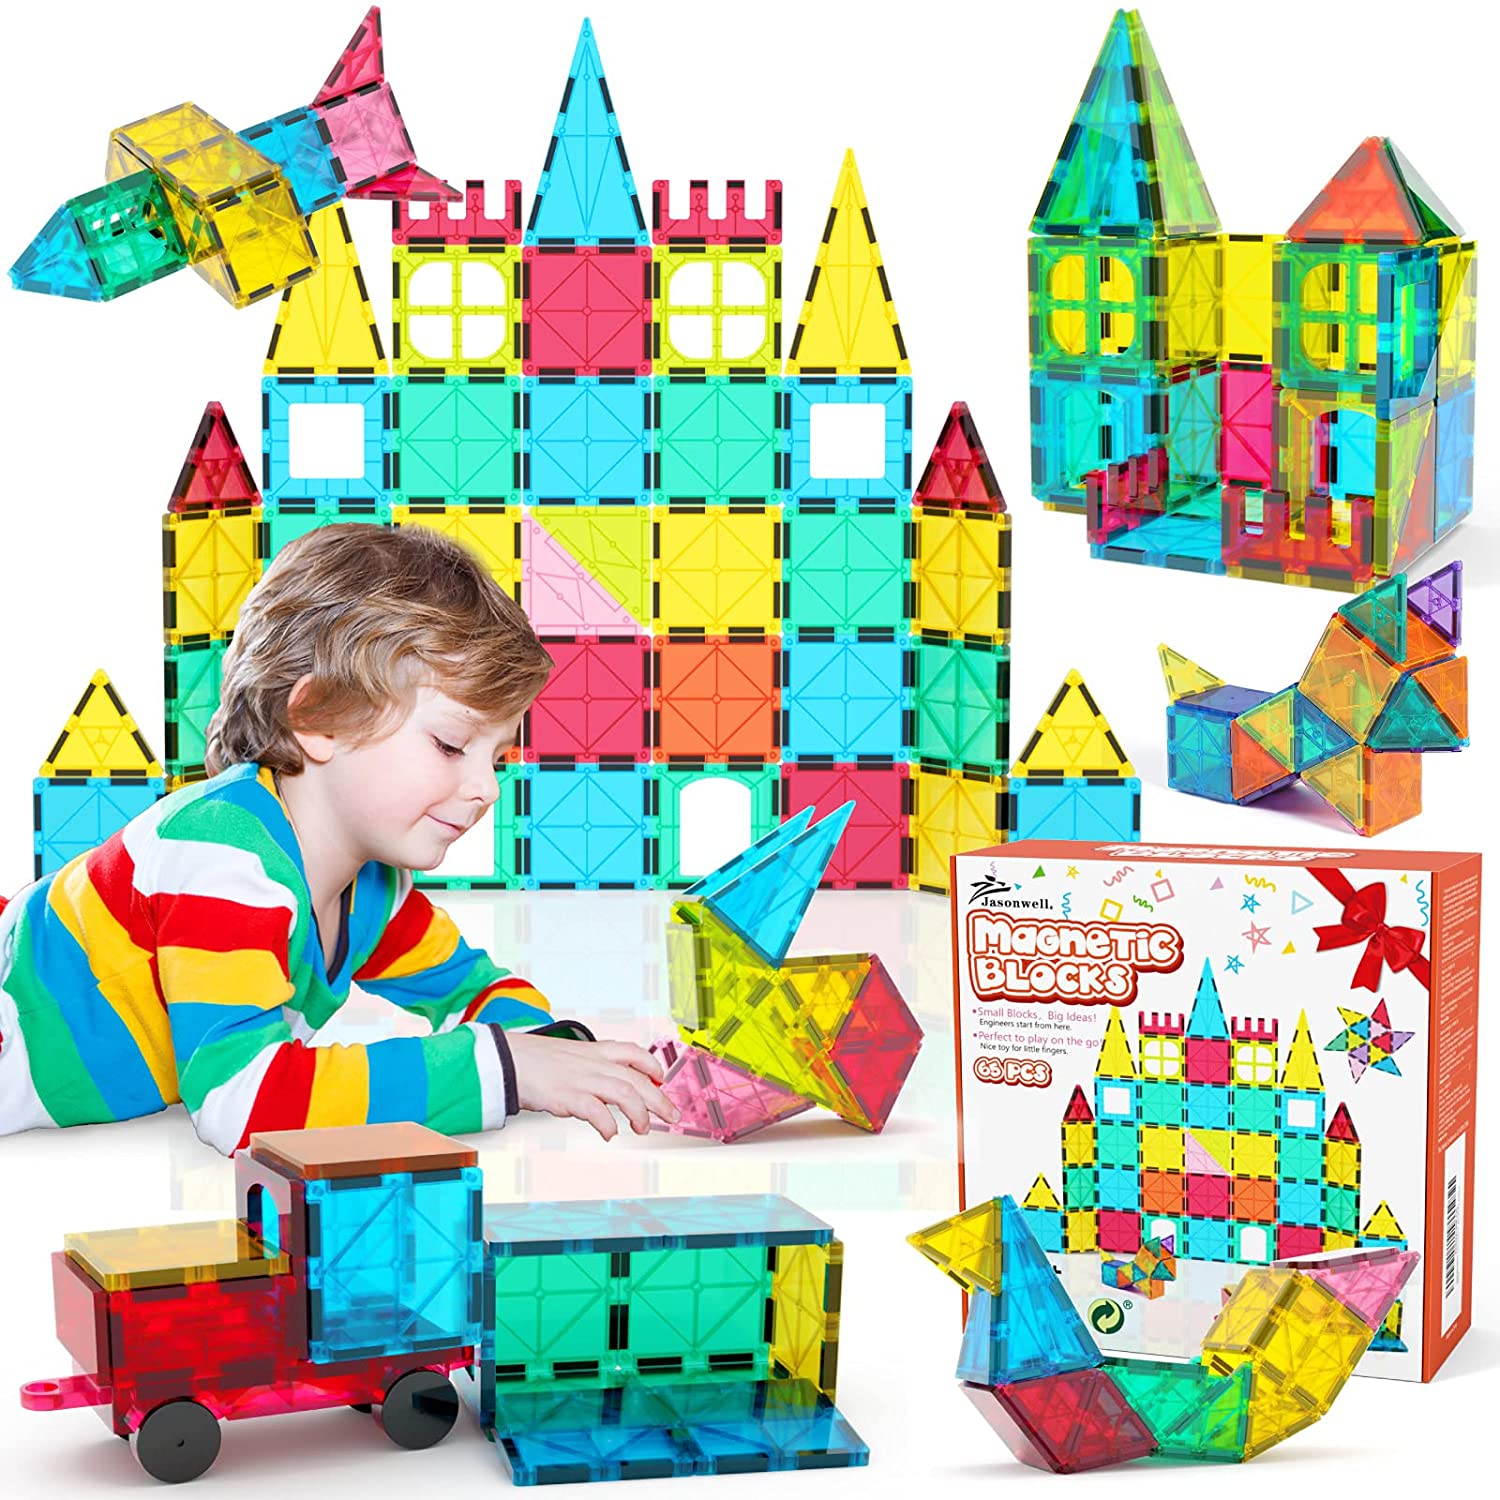  Desire Deluxe Magnetic Tiles Blocks Building Set for Kids –  Learning Educational Toys for Boys Girls for Age 3-8 Year-Old – Birthday  Present Gift (57PC) : Toys & Games